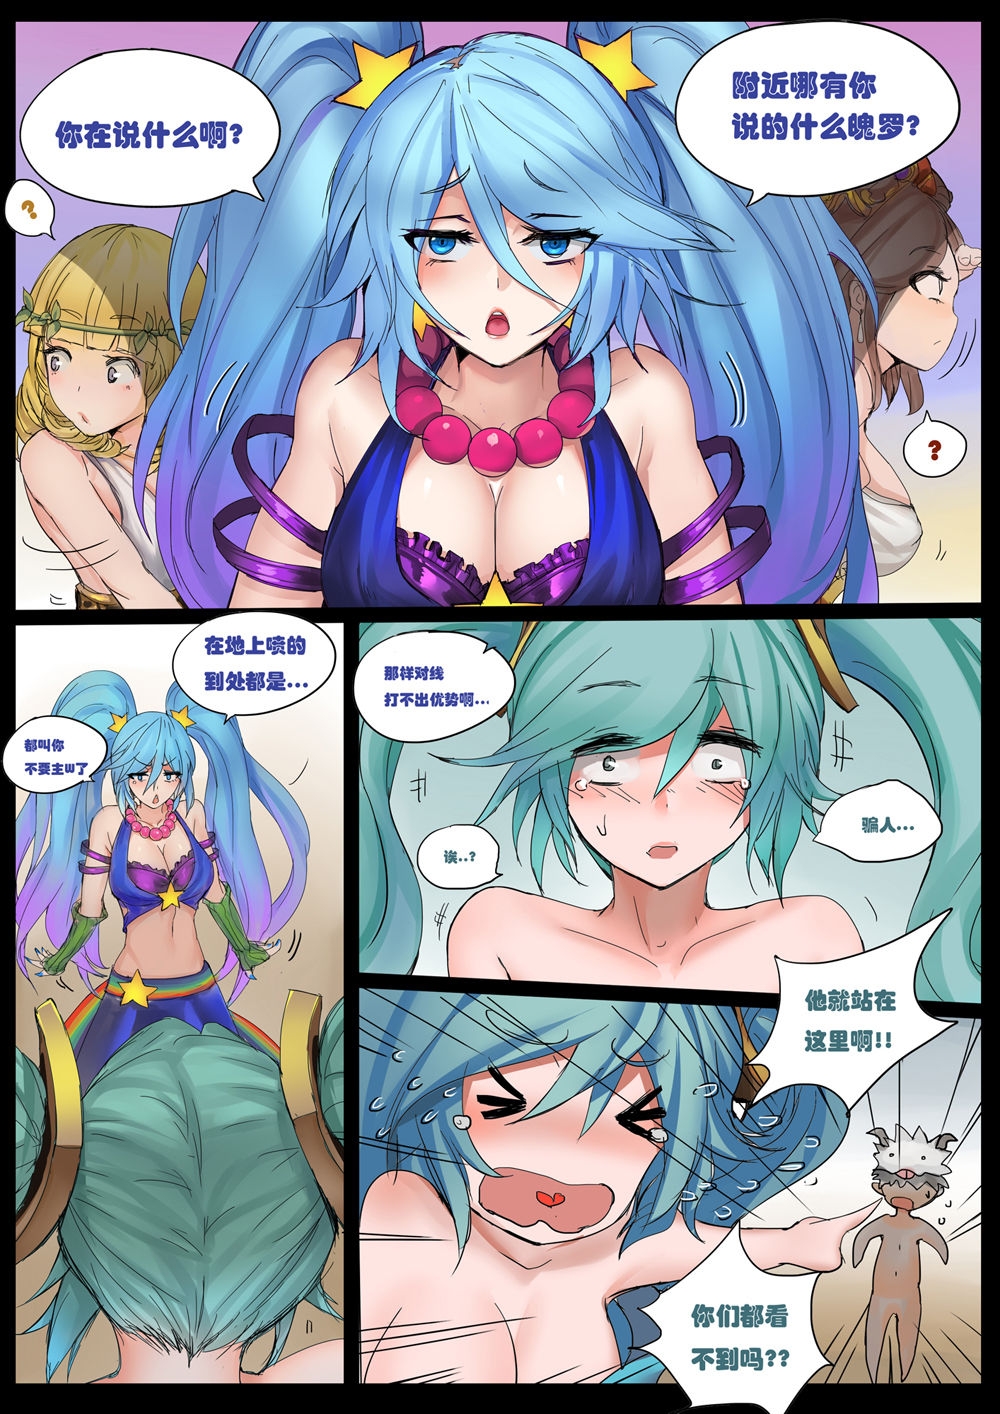 [Pd] Sona's Home Second Part (League of Legends) [Chinese] 3